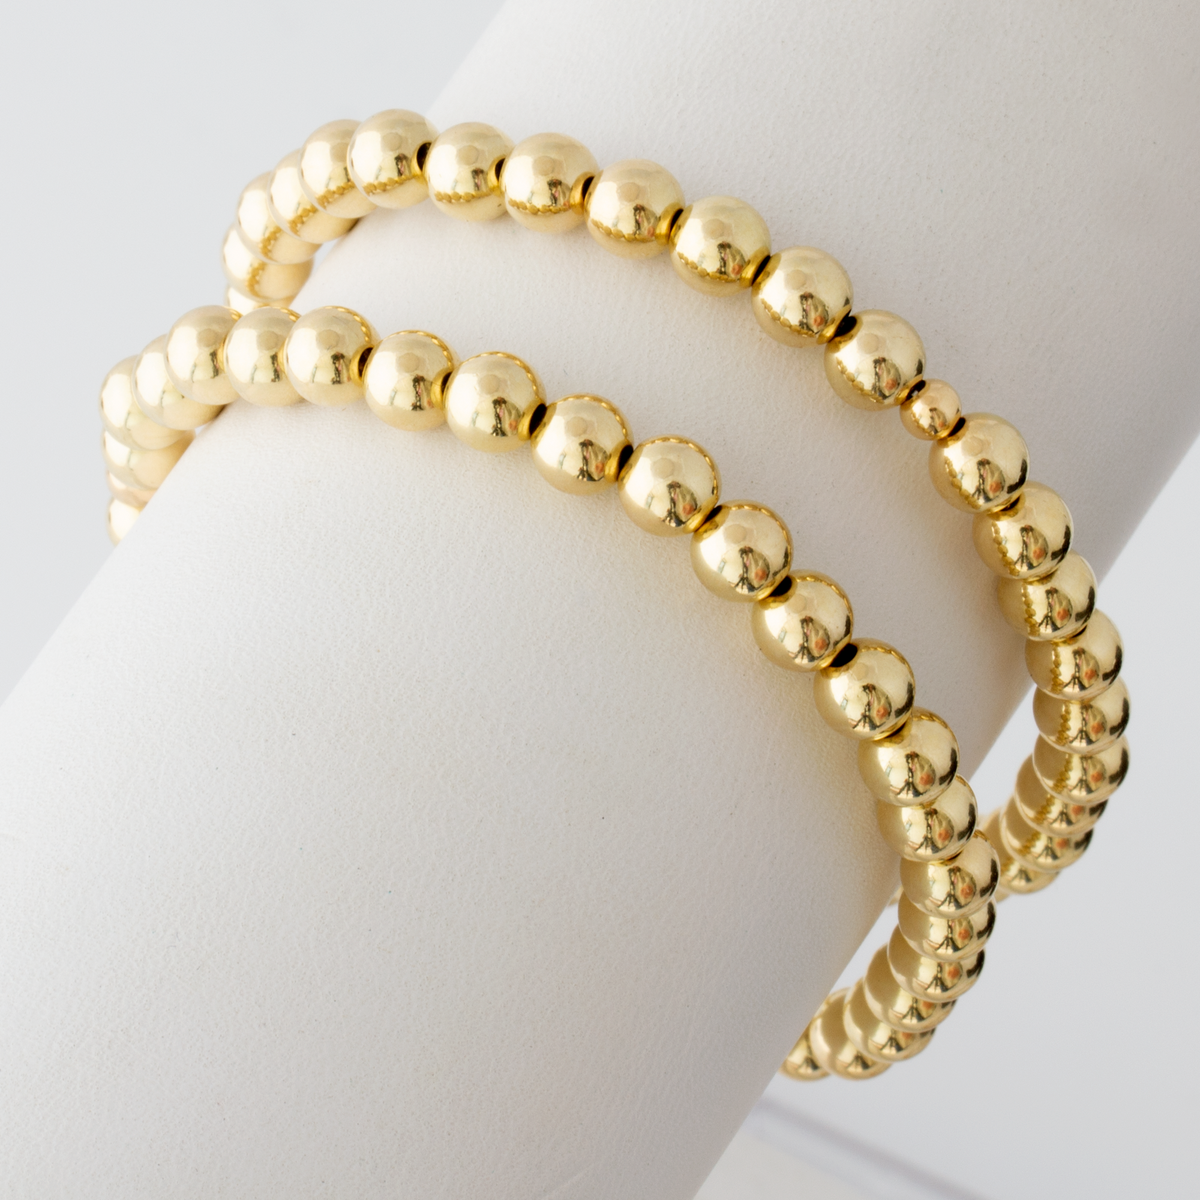  WOWORAMA Gold Ball Bracelet for Women 14K Gold Plated